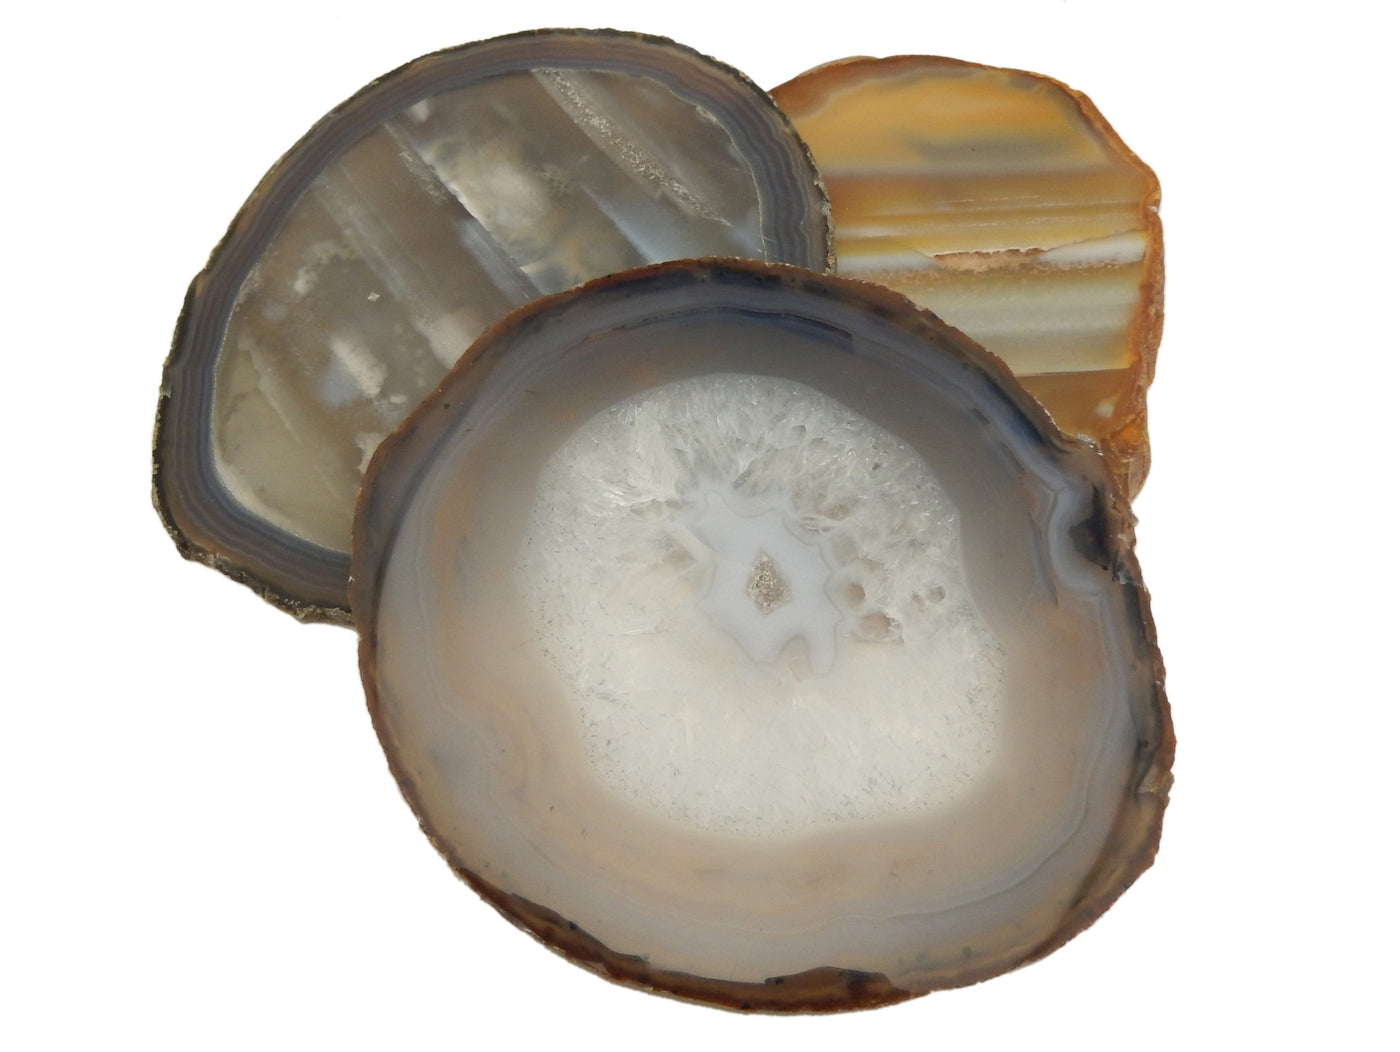 Natural Agate Slice - Agate Slices #7 - 3 Stacked together